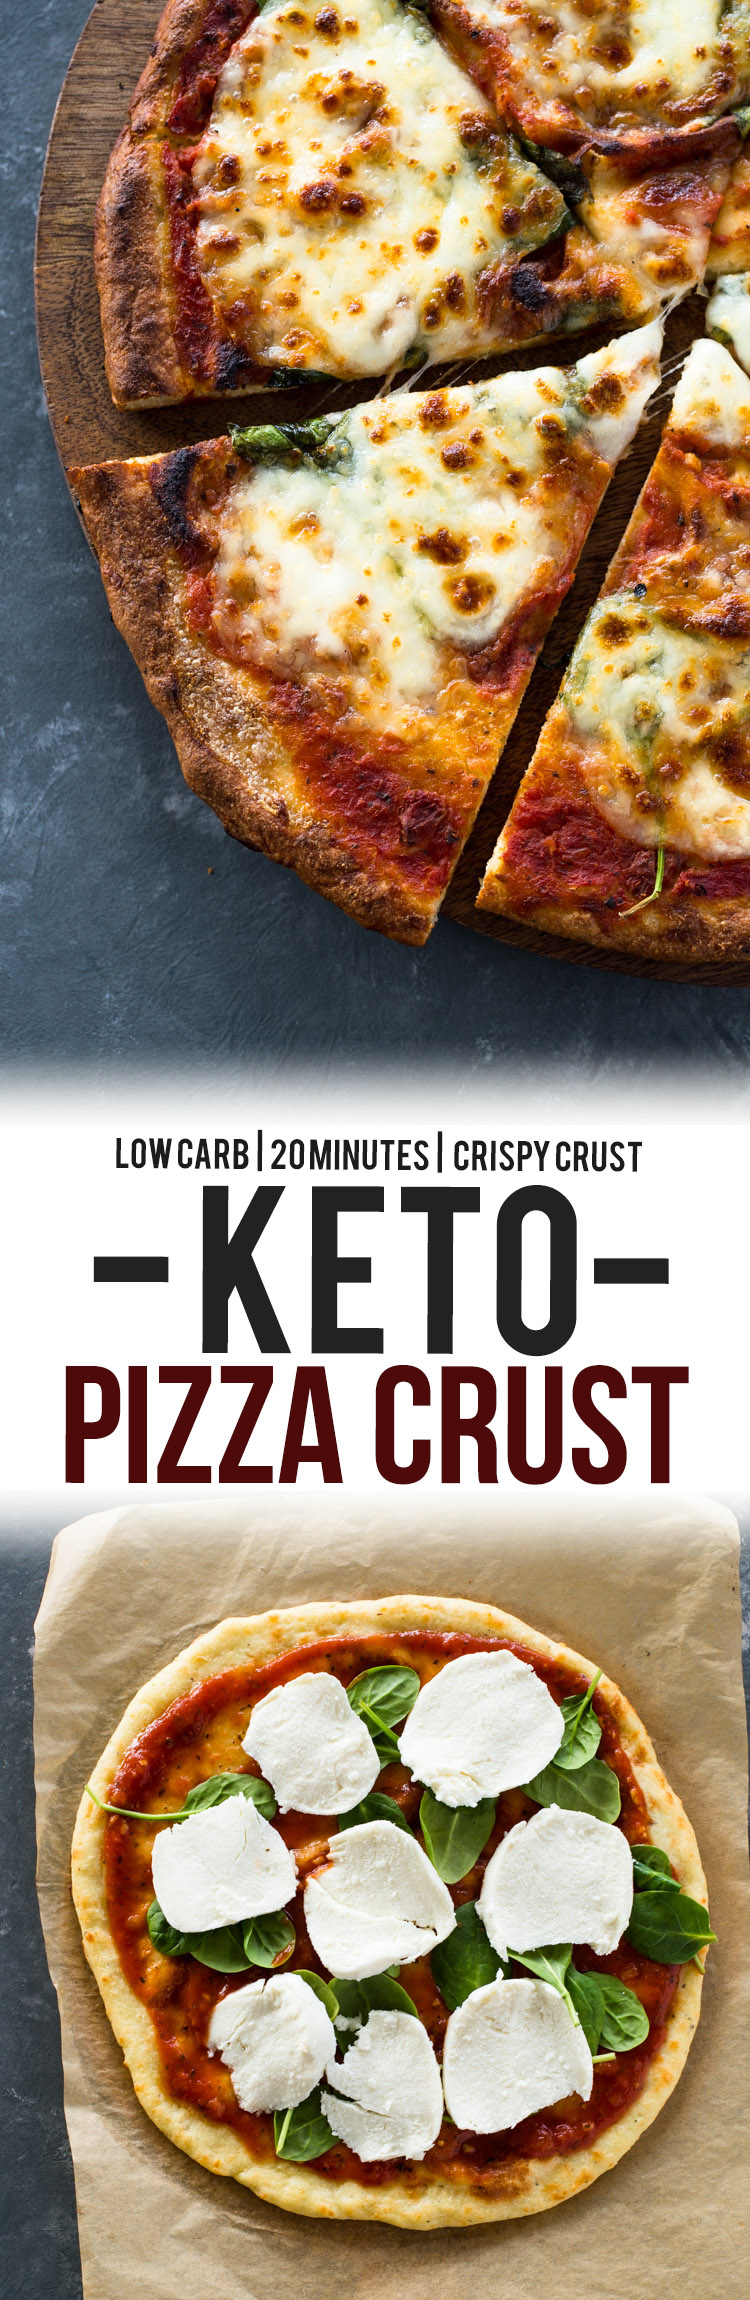 The Best Keto Pizza Crust